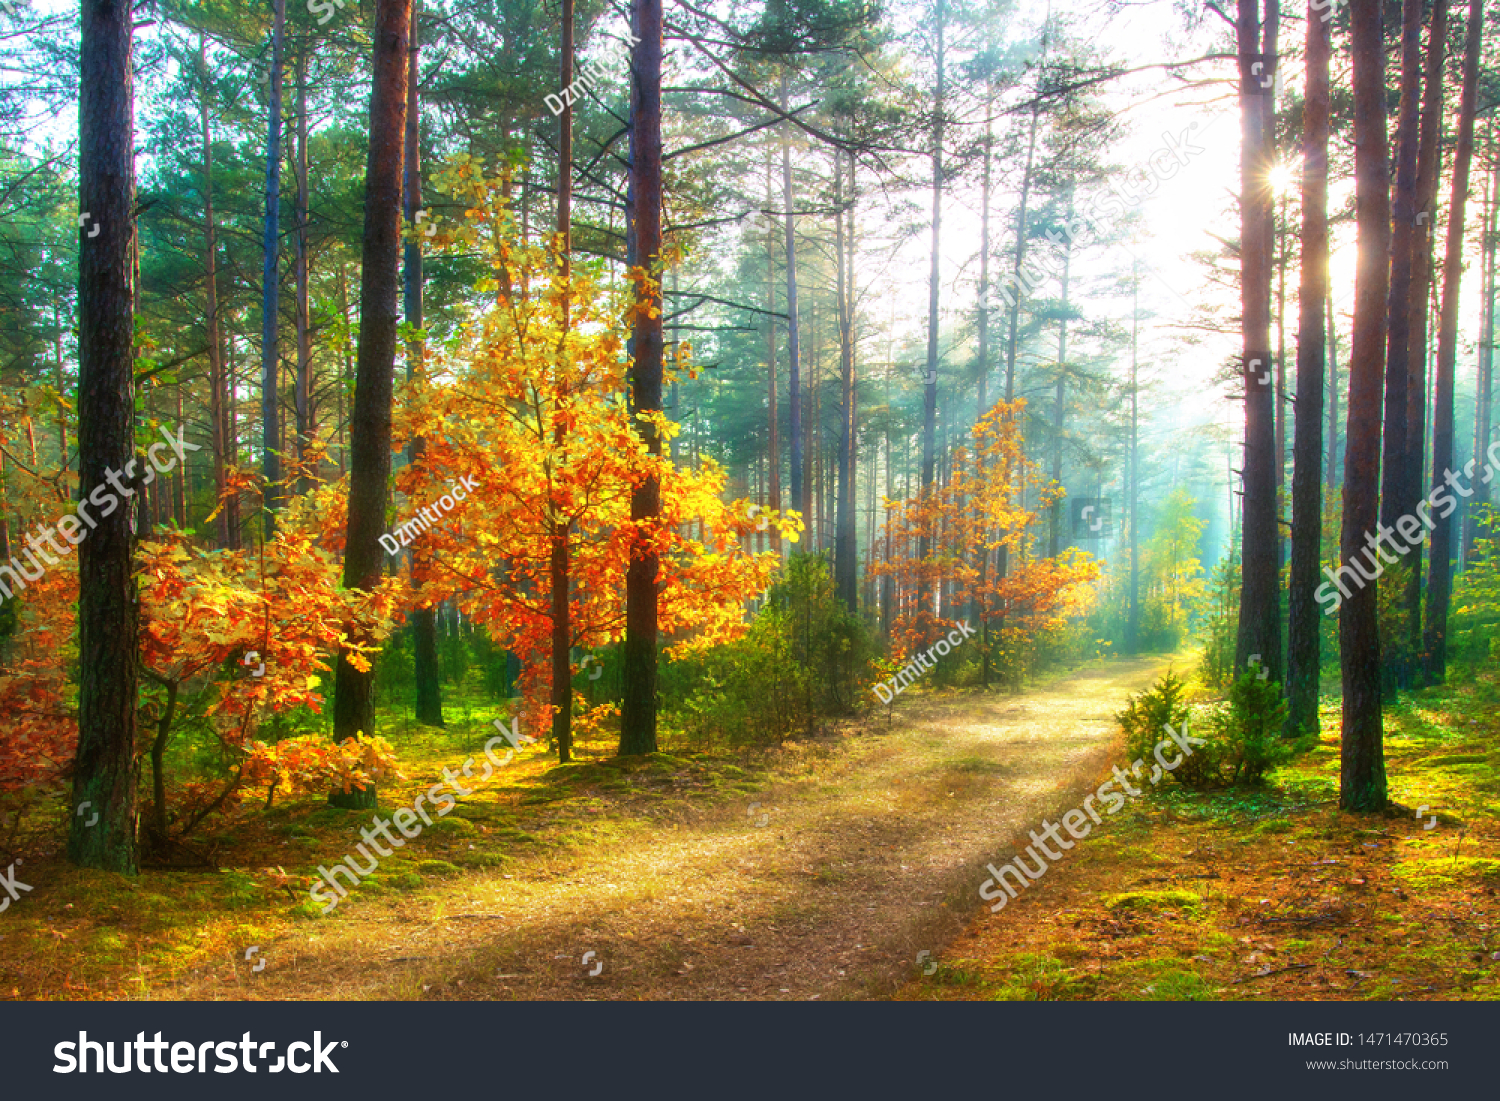 Scenery autumn forest. Sunny woodland. October nature landscape. Beautiful bright forest in sunlight. #1471470365